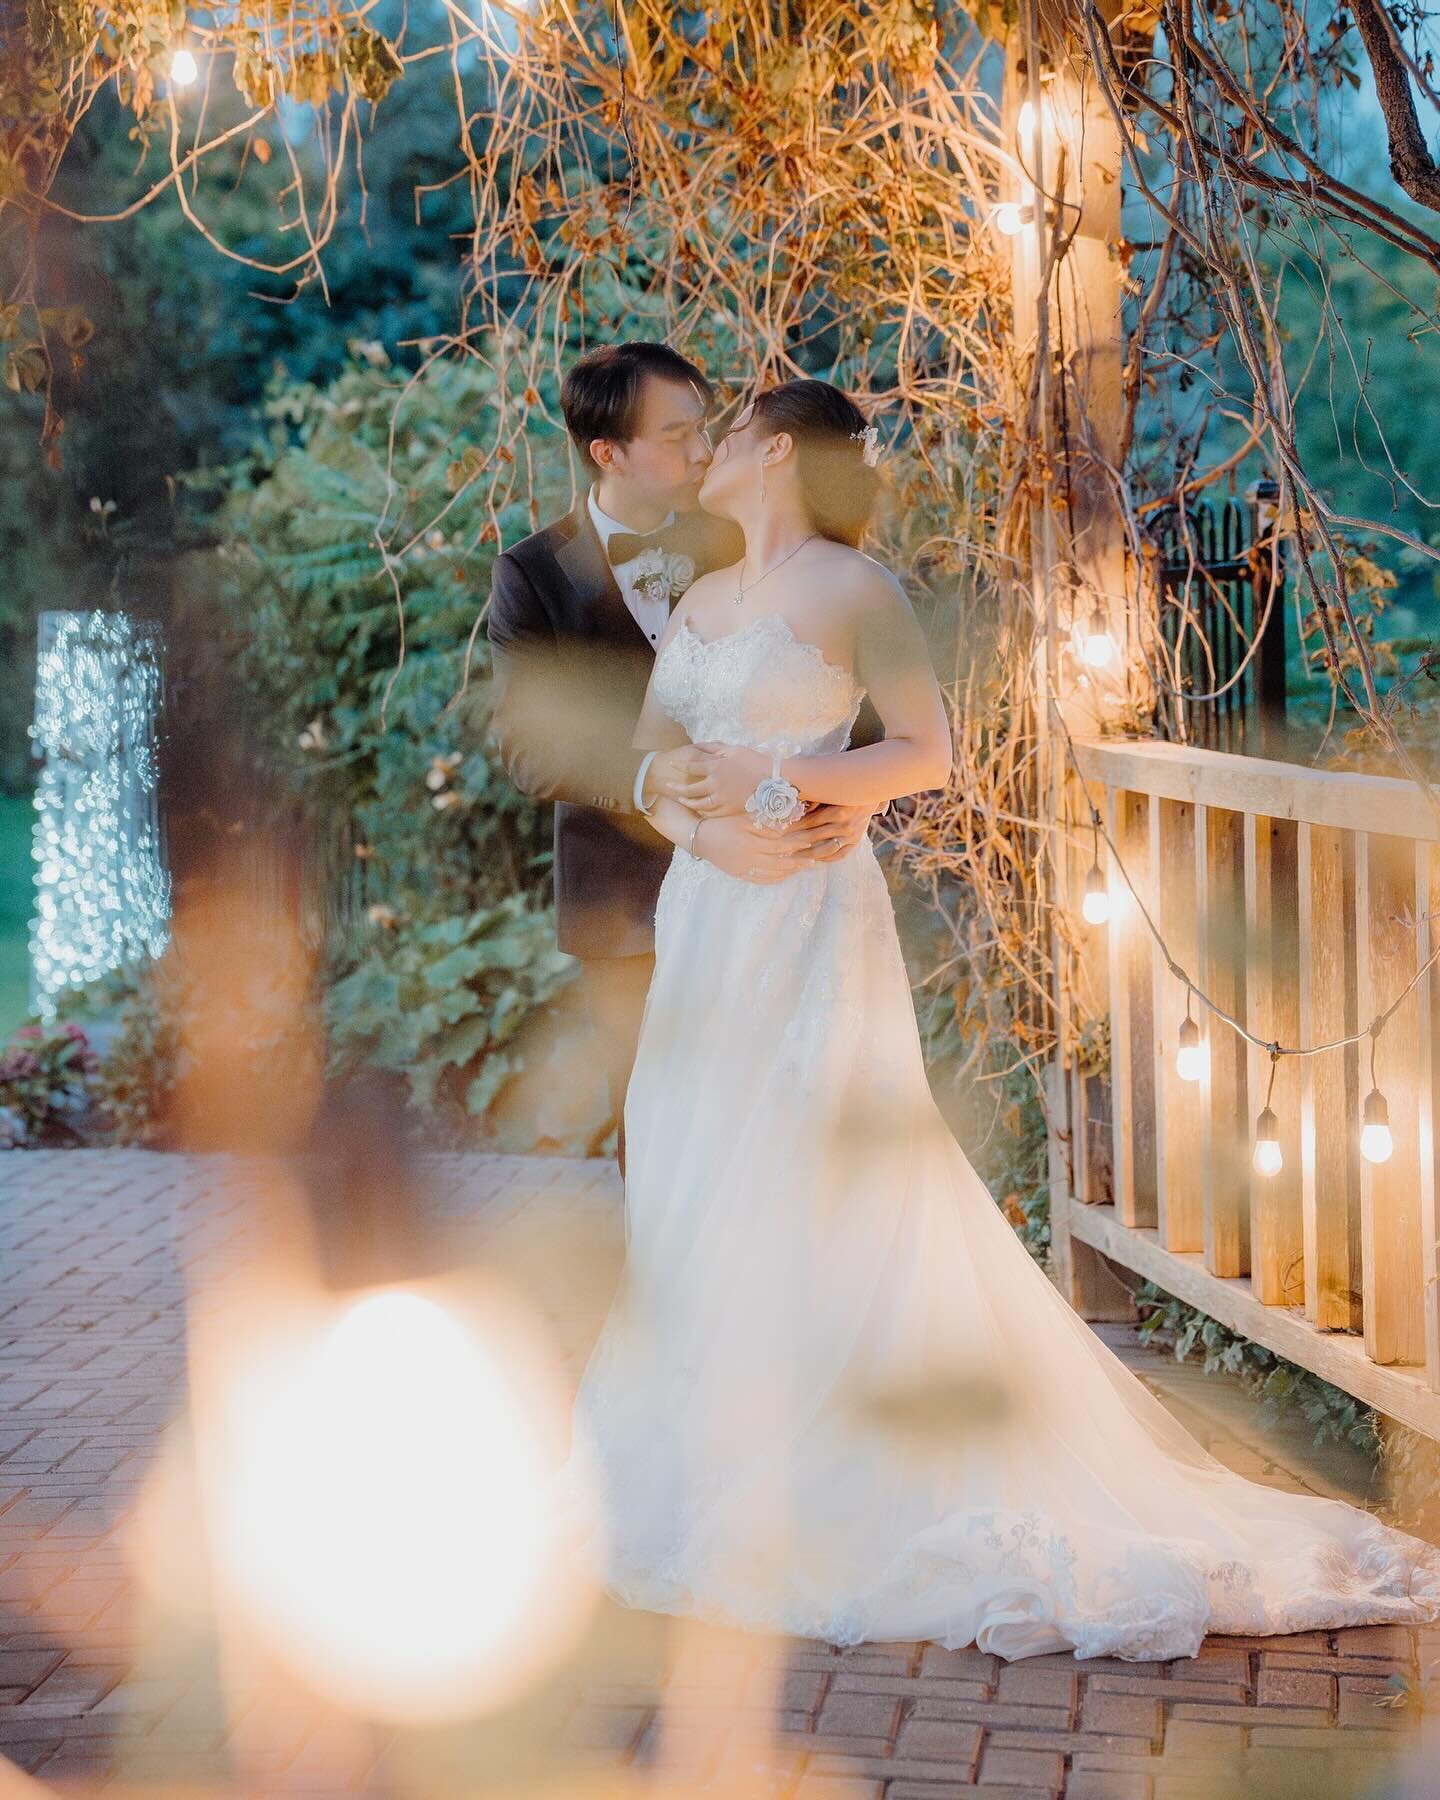 ✨Comment if you like night or day photos for your wedding✨

We like both but what is your favorite?

✨

#creativephotography #elopementcollective #weddingsparrow #creativecouples #weddingphotoinspiration #elopementphotography #torontoweddingphotograp